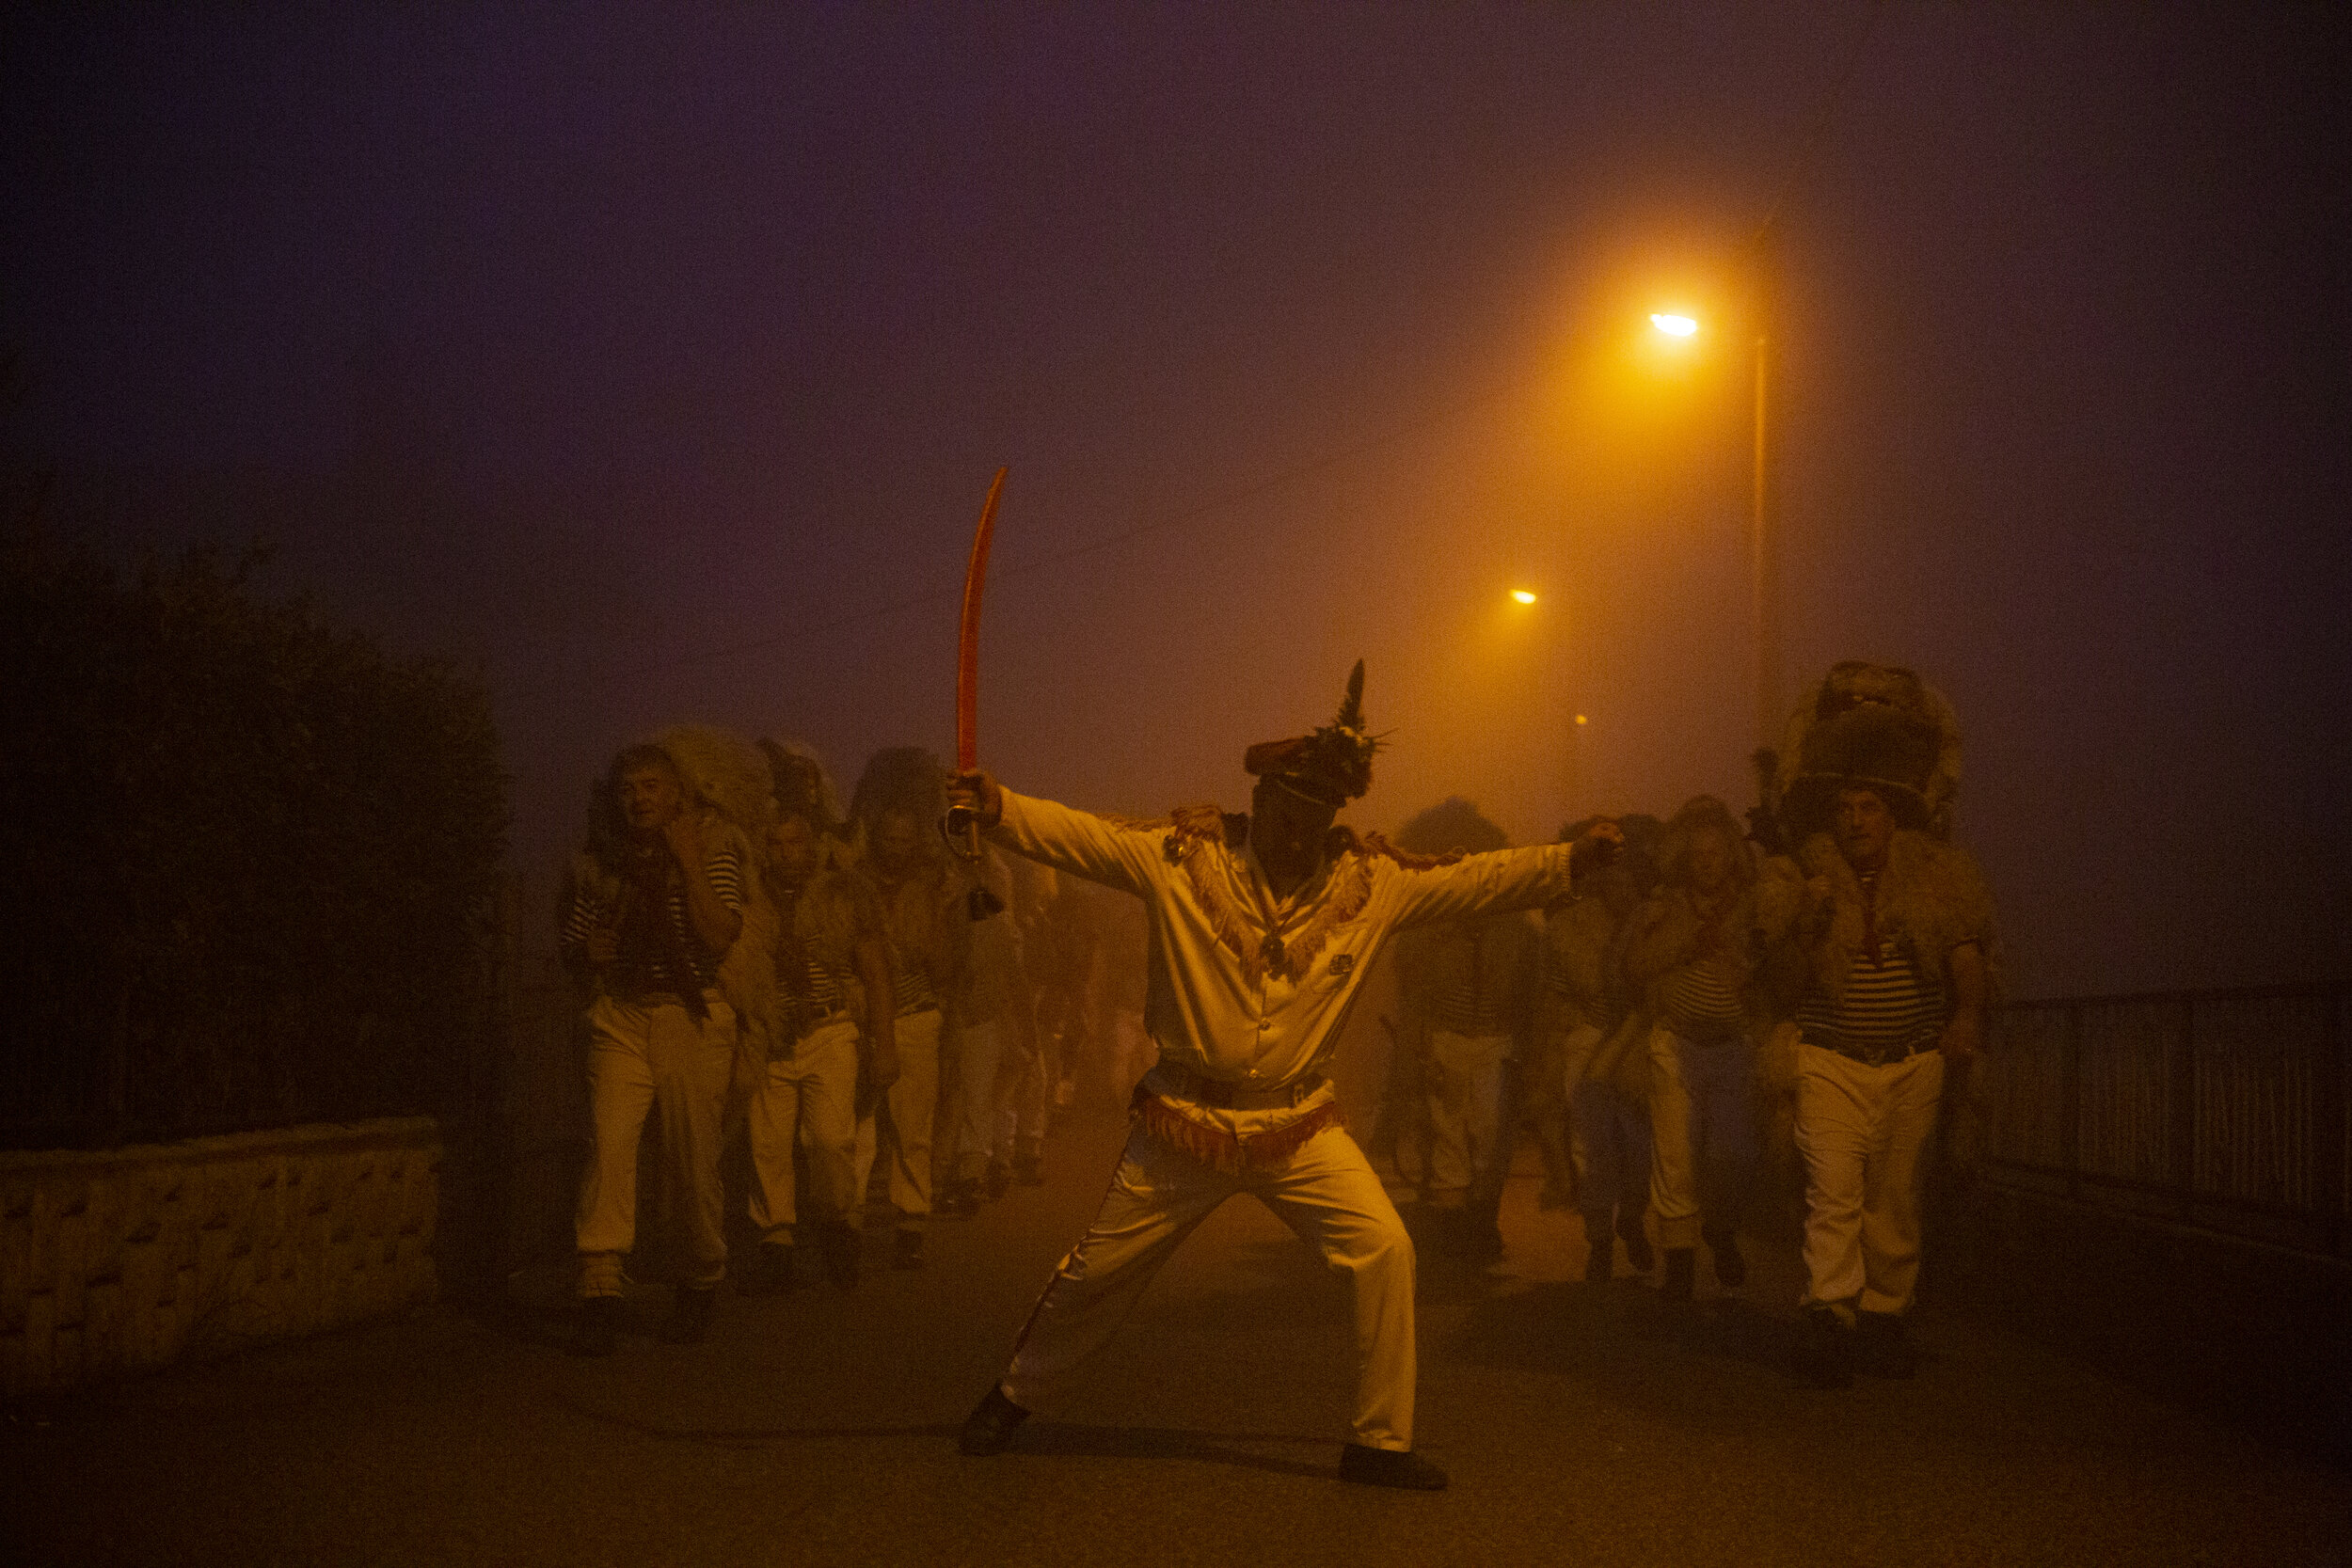  In the final stretch of their three-day tour of the region, Halubajski zvončari walk through a deep fog to the village of Viskovo, where they will burn an Effigy representing evil from the last year in order to move into a new year. This is known as